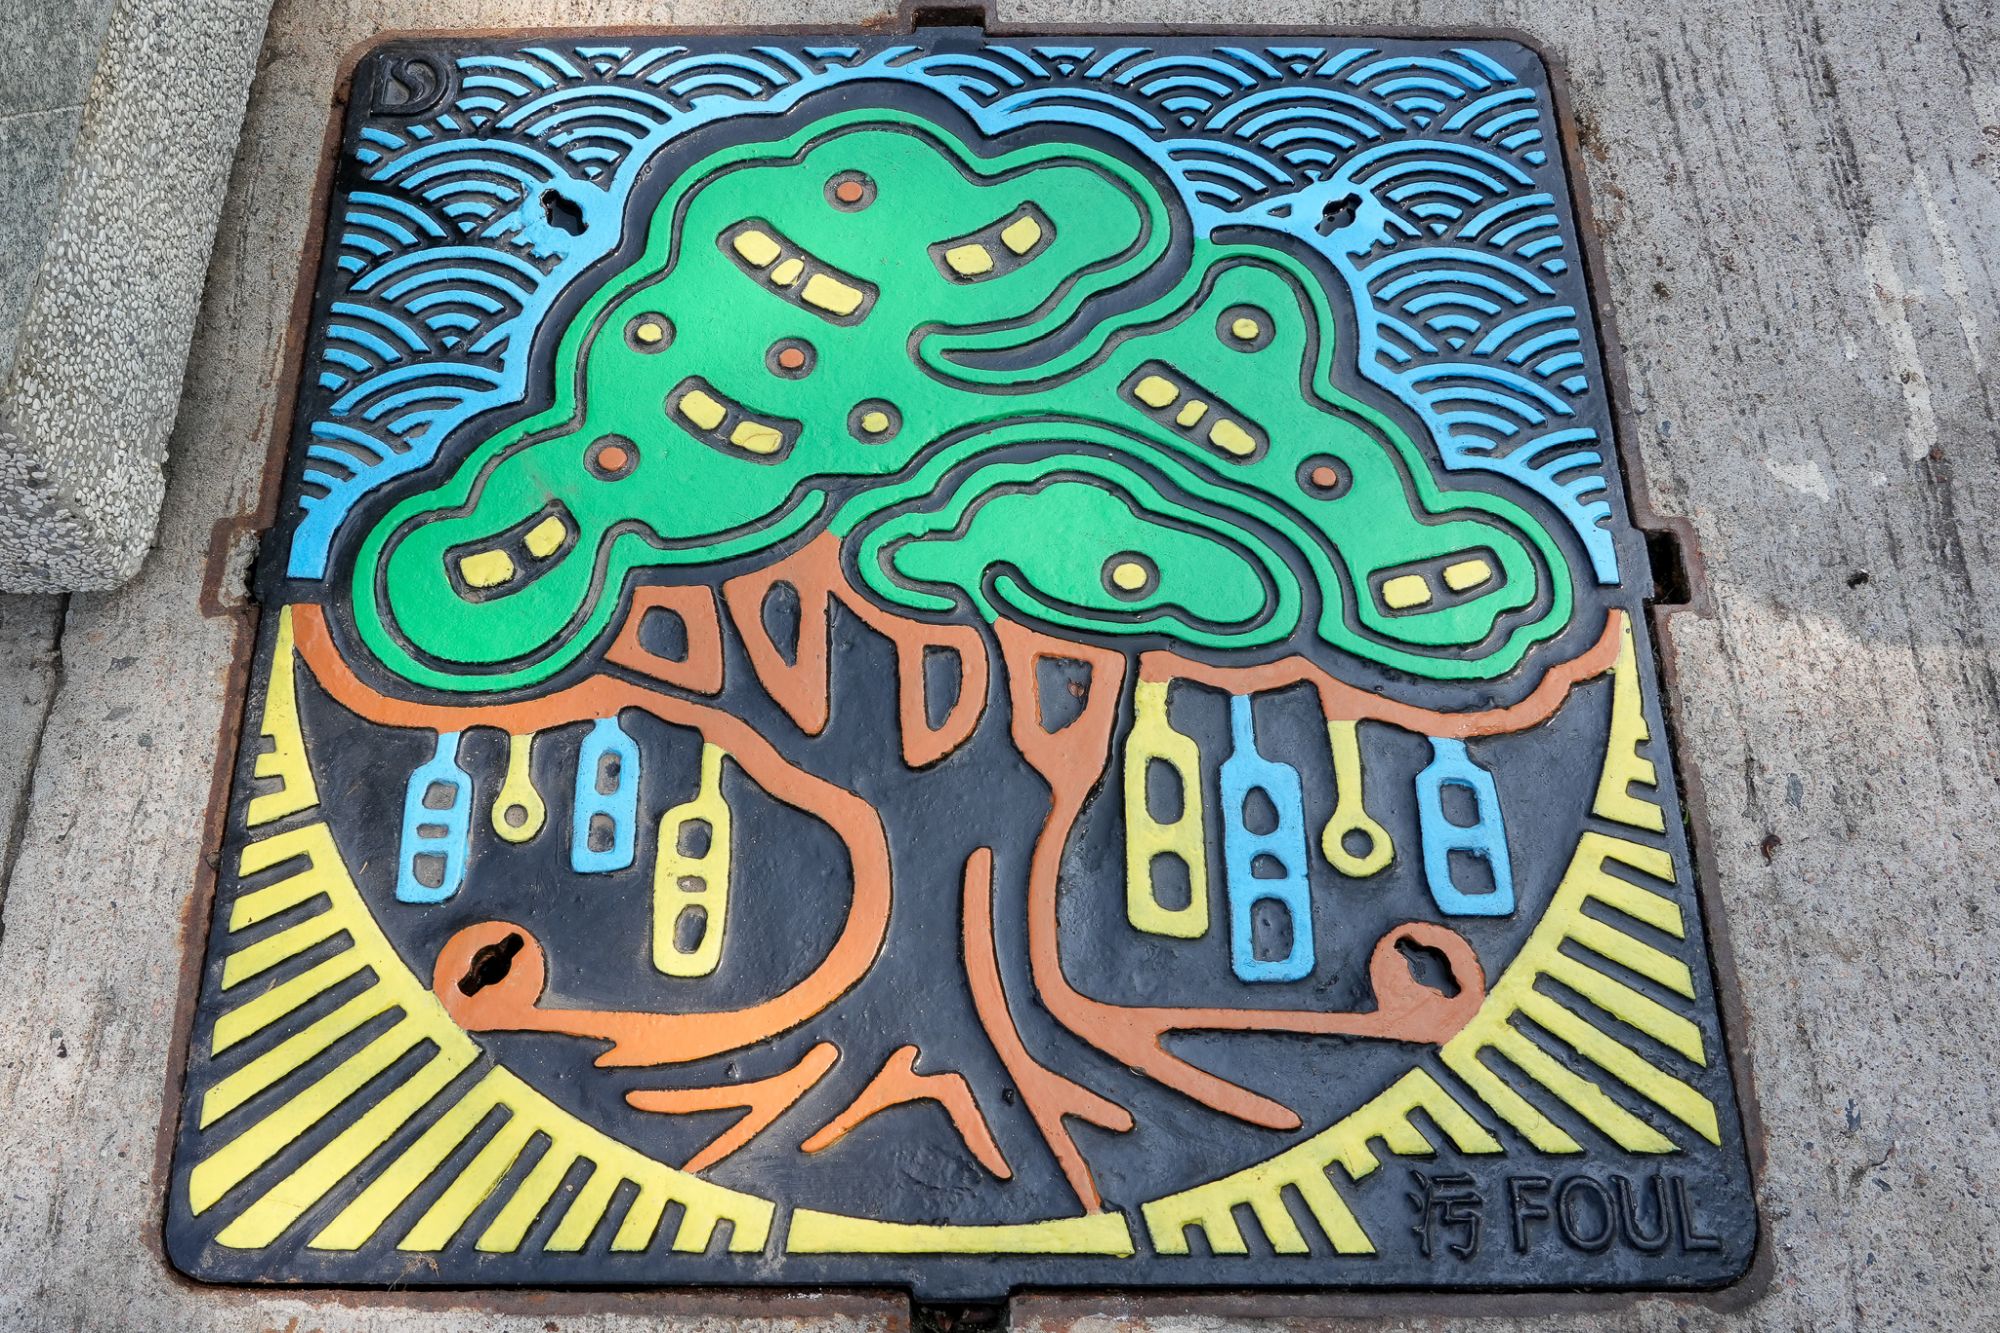 The thematic manhole covers are designed with the theme of Wishing Trees, depicting a magnificent banyan tree with loads of wishing placards that symbolise blessing hanging on its branches.